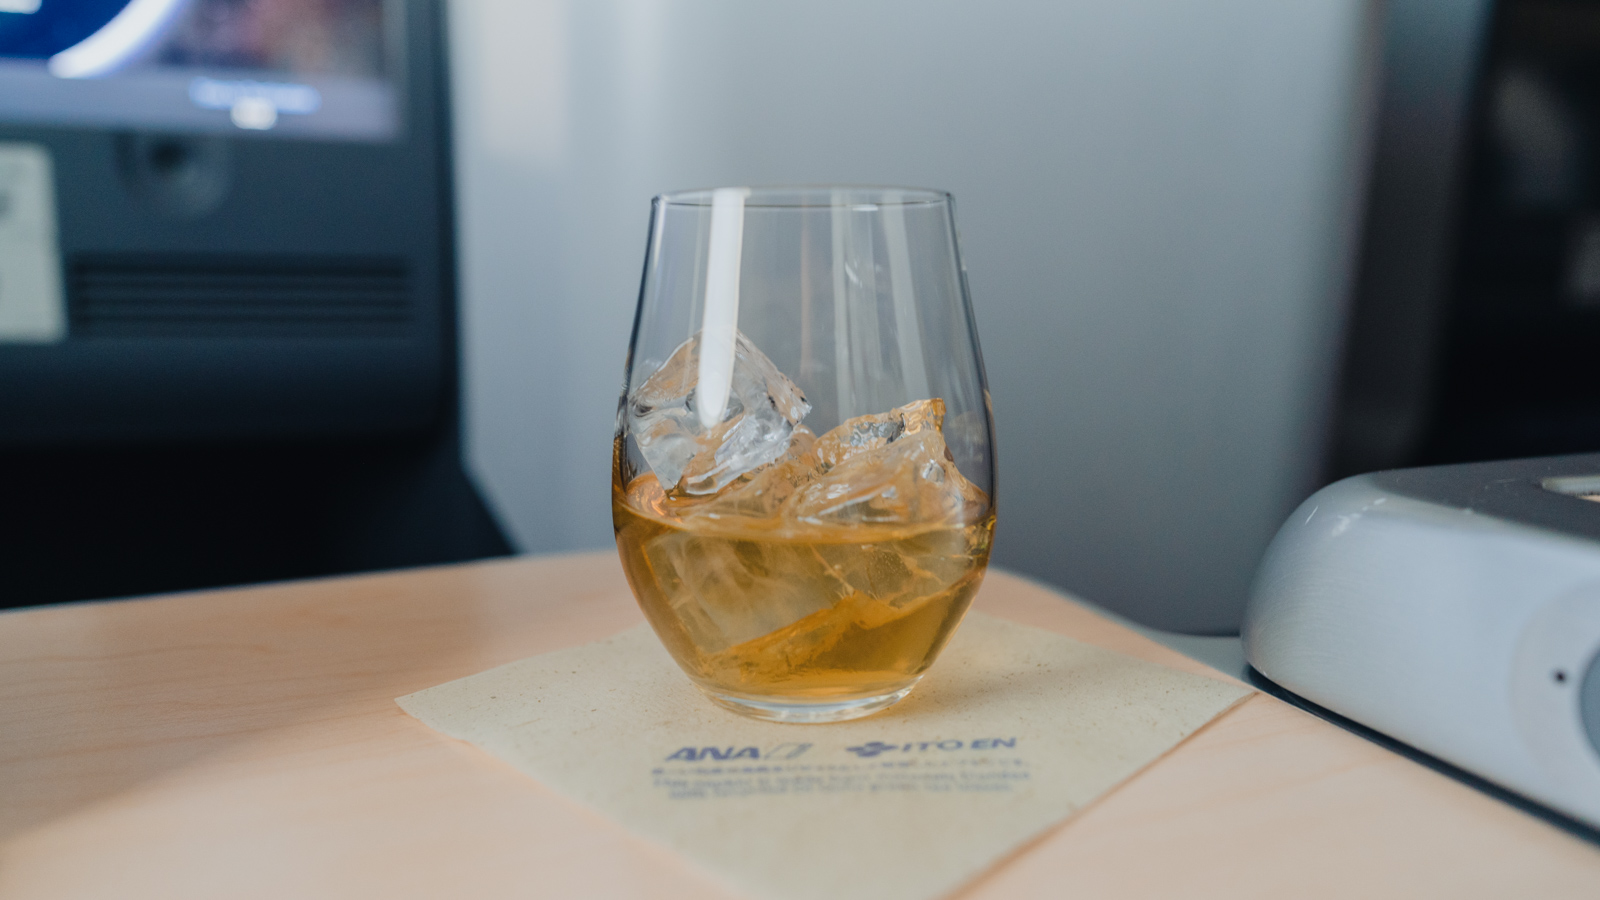 ANA Boeing 787-9 Business Class whisky